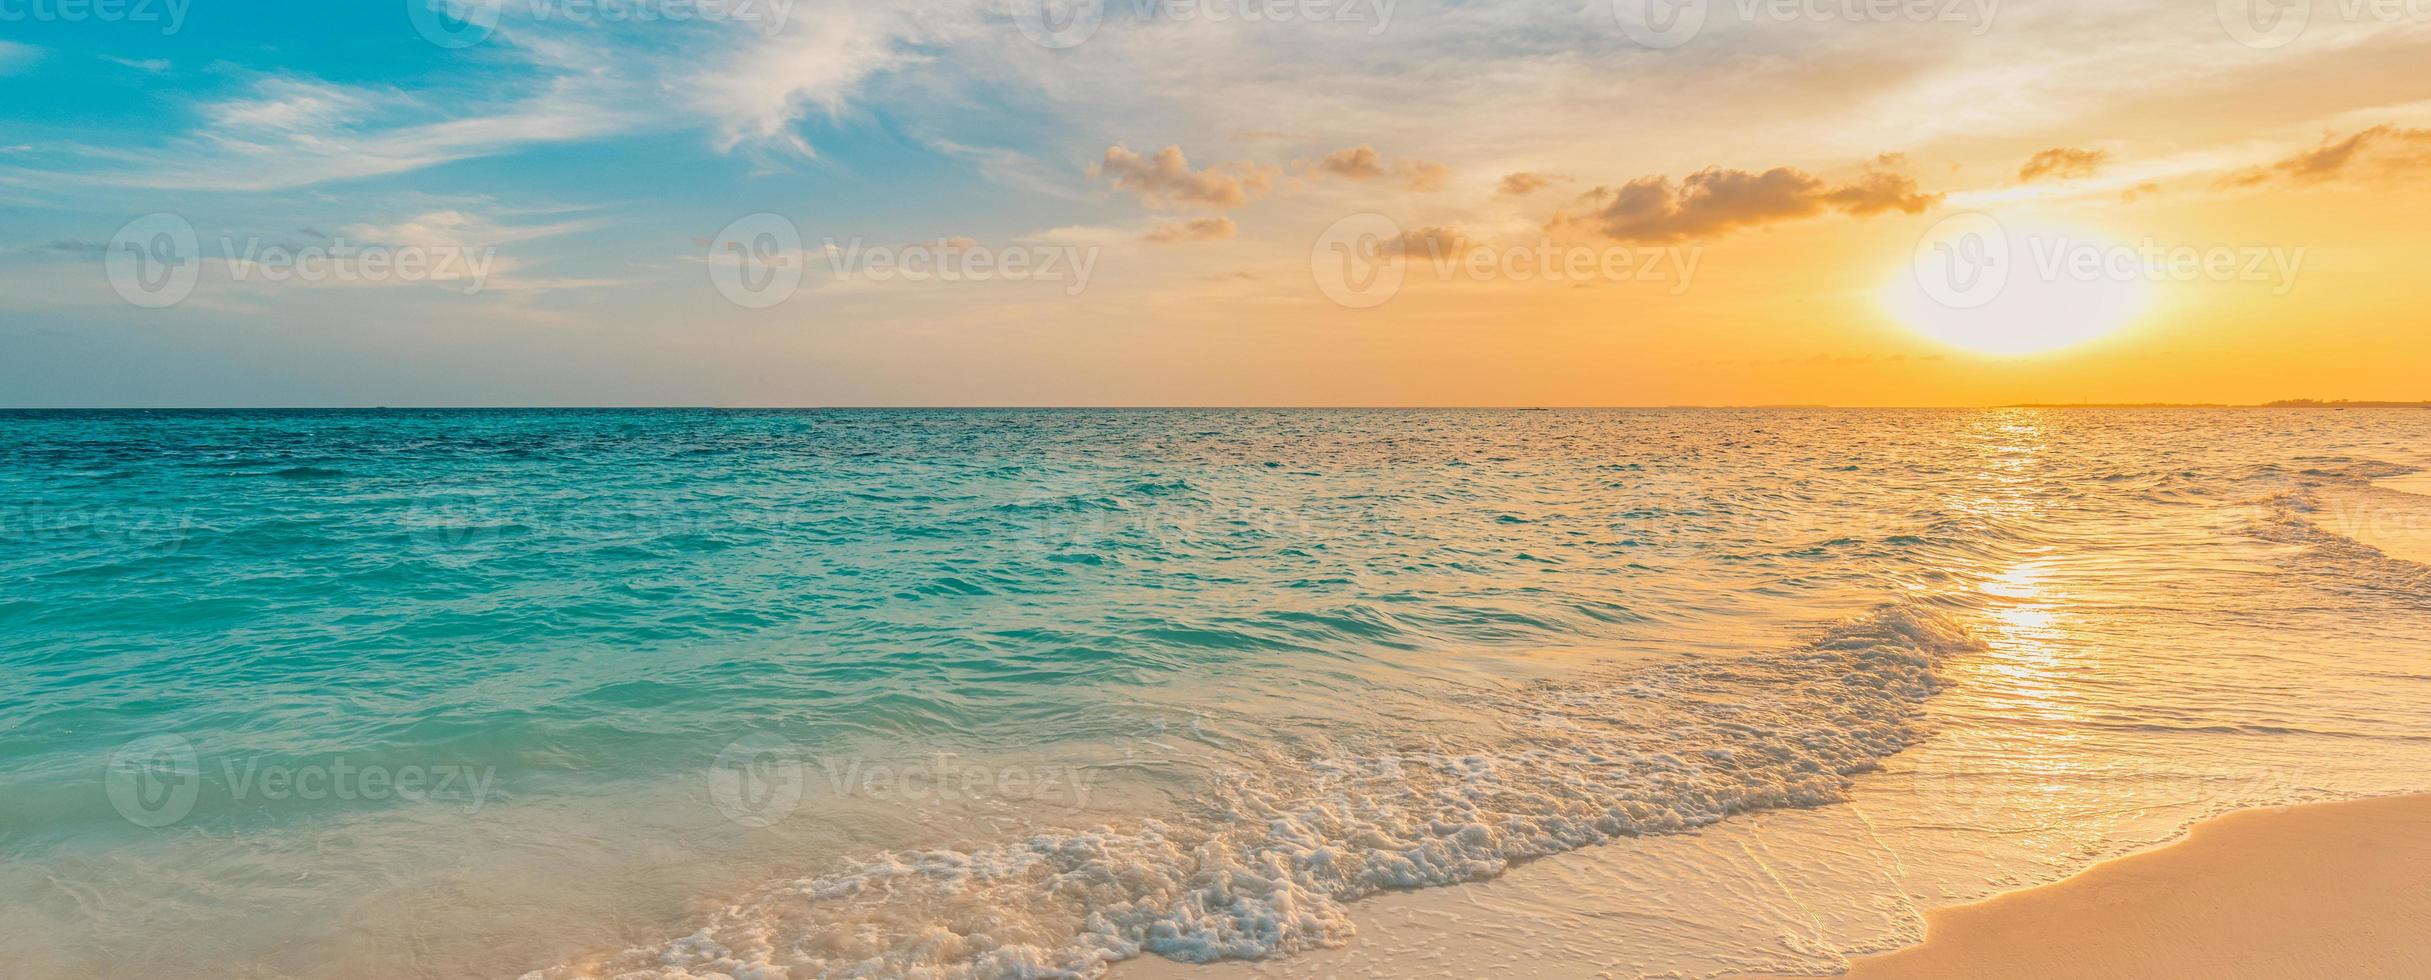 Sea ocean beach sunset sunrise landscape outdoor. Water wave with white foam. Beautiful sunset colorful sky with clouds. Natural island panoramic background. Idyllic amazing tropical island shore photo